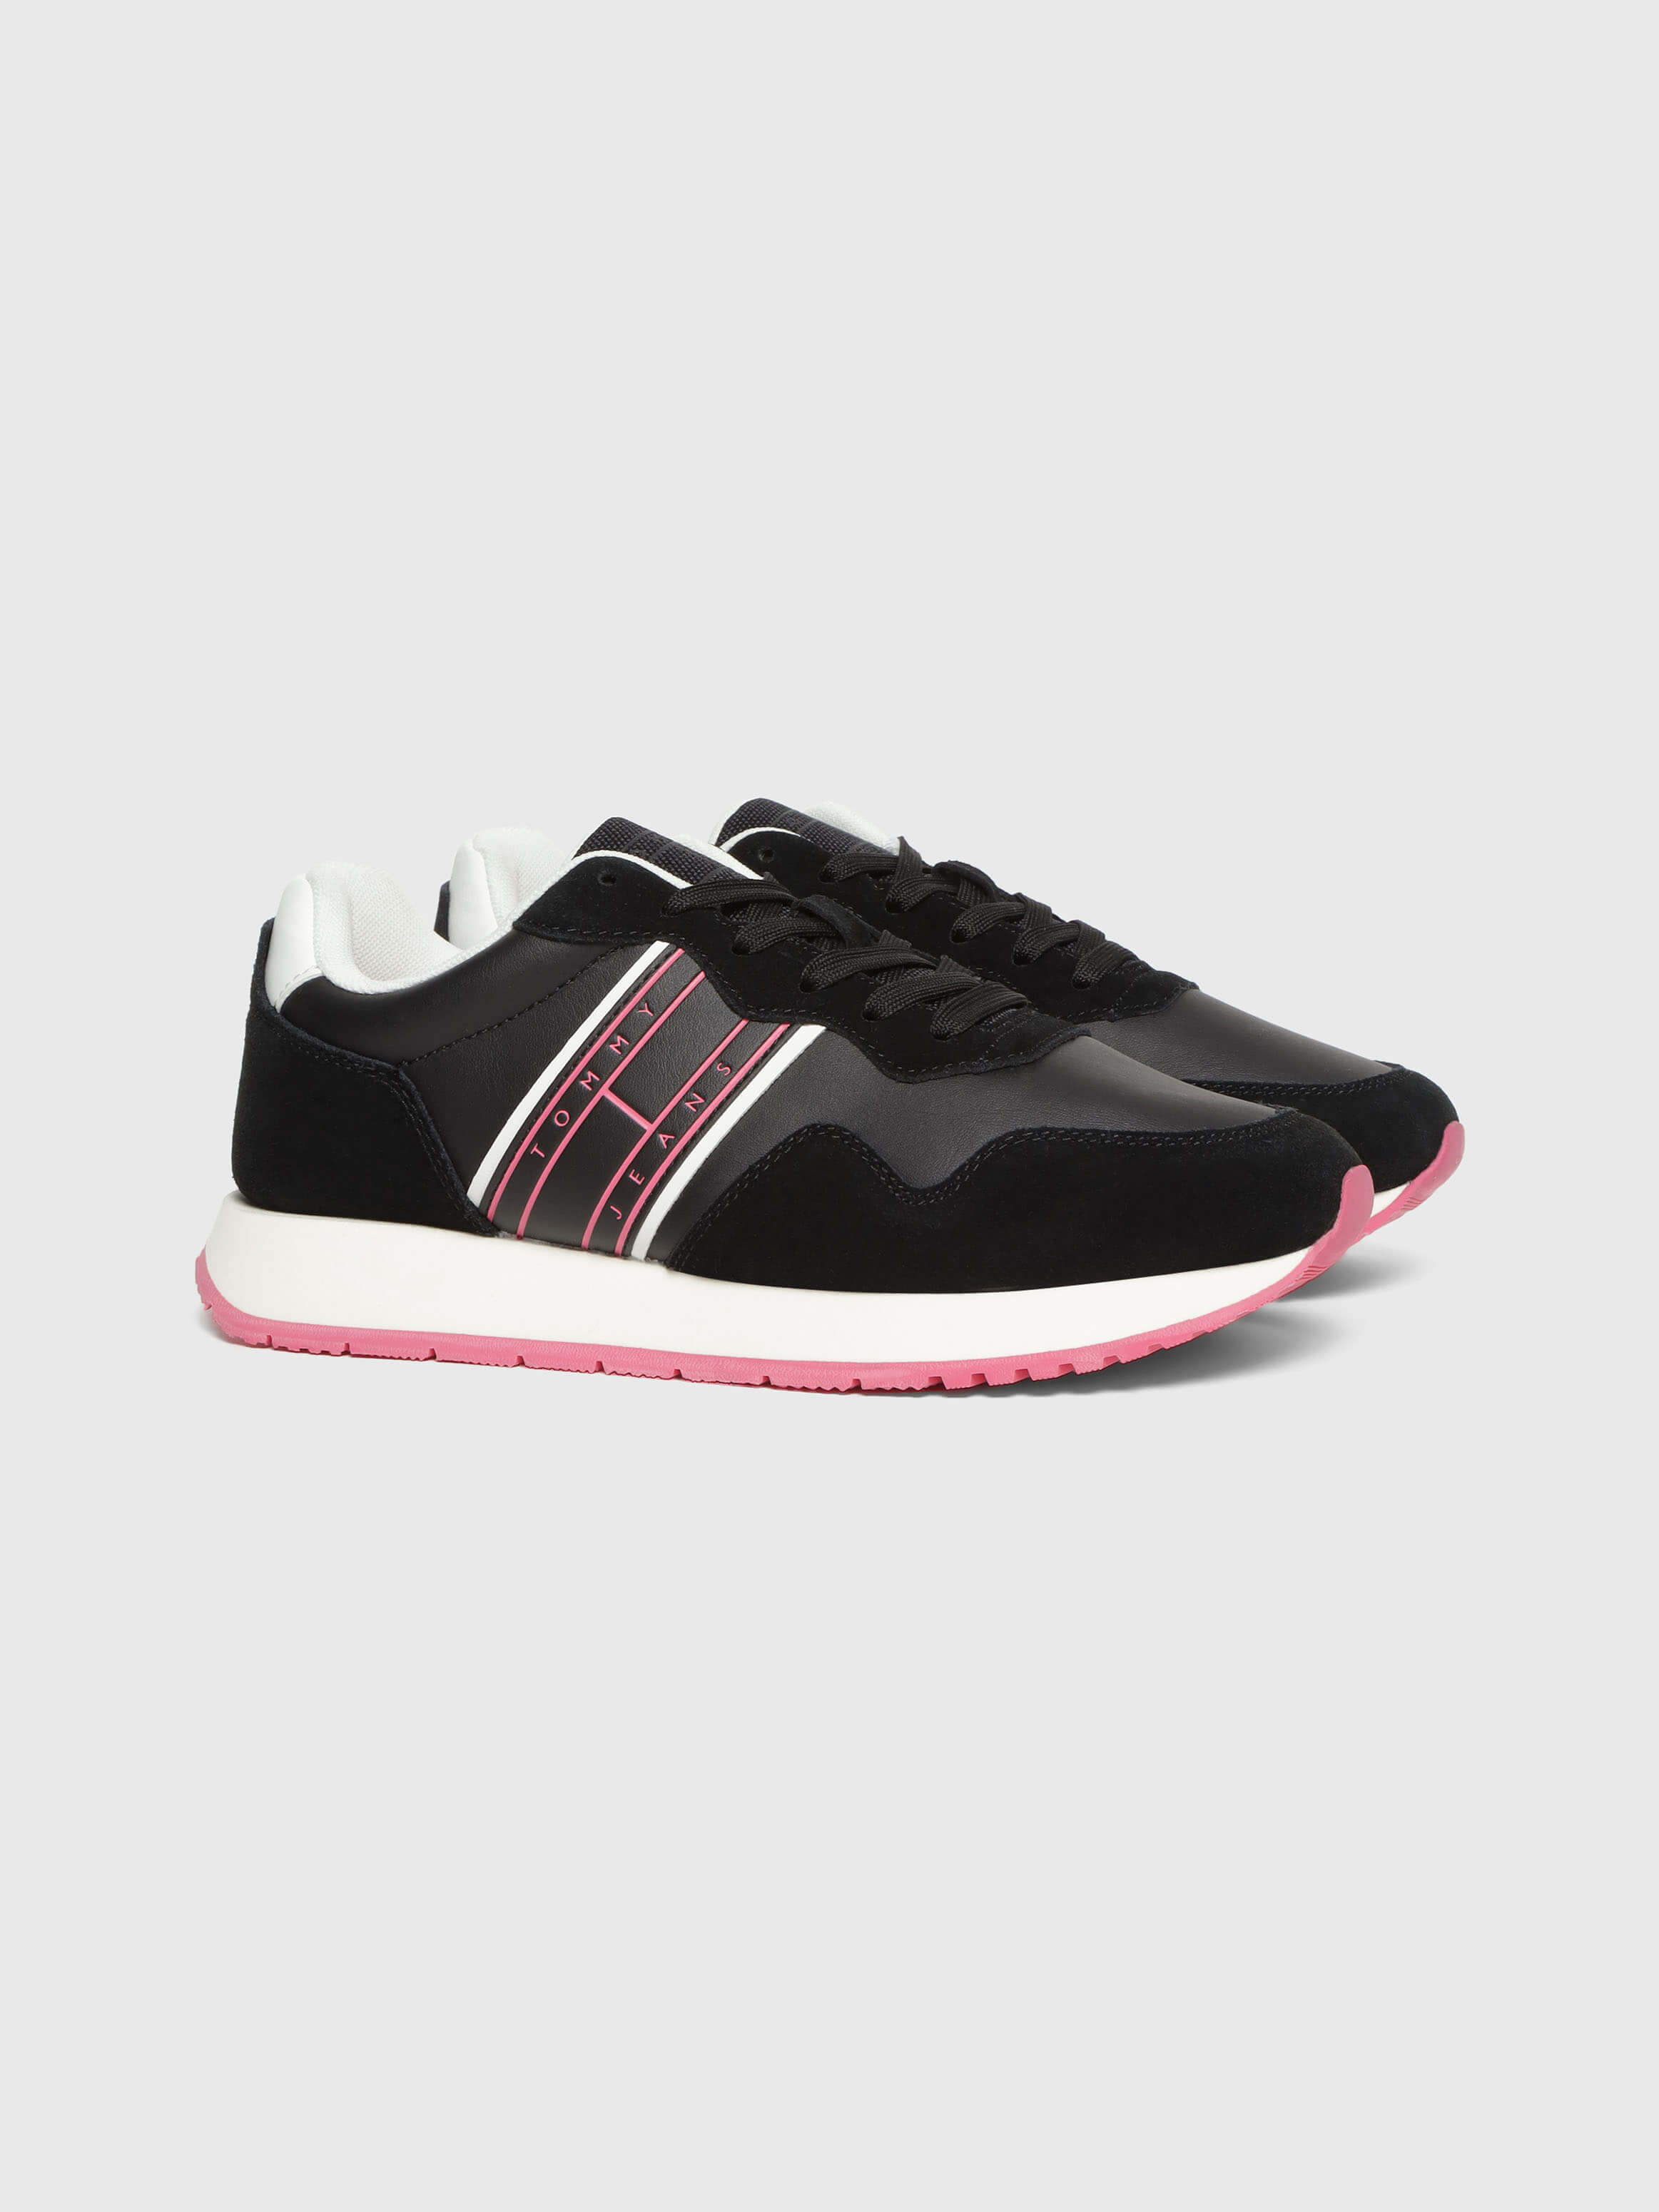 Tenis Tommy Hilfiger Anni10 para mujer